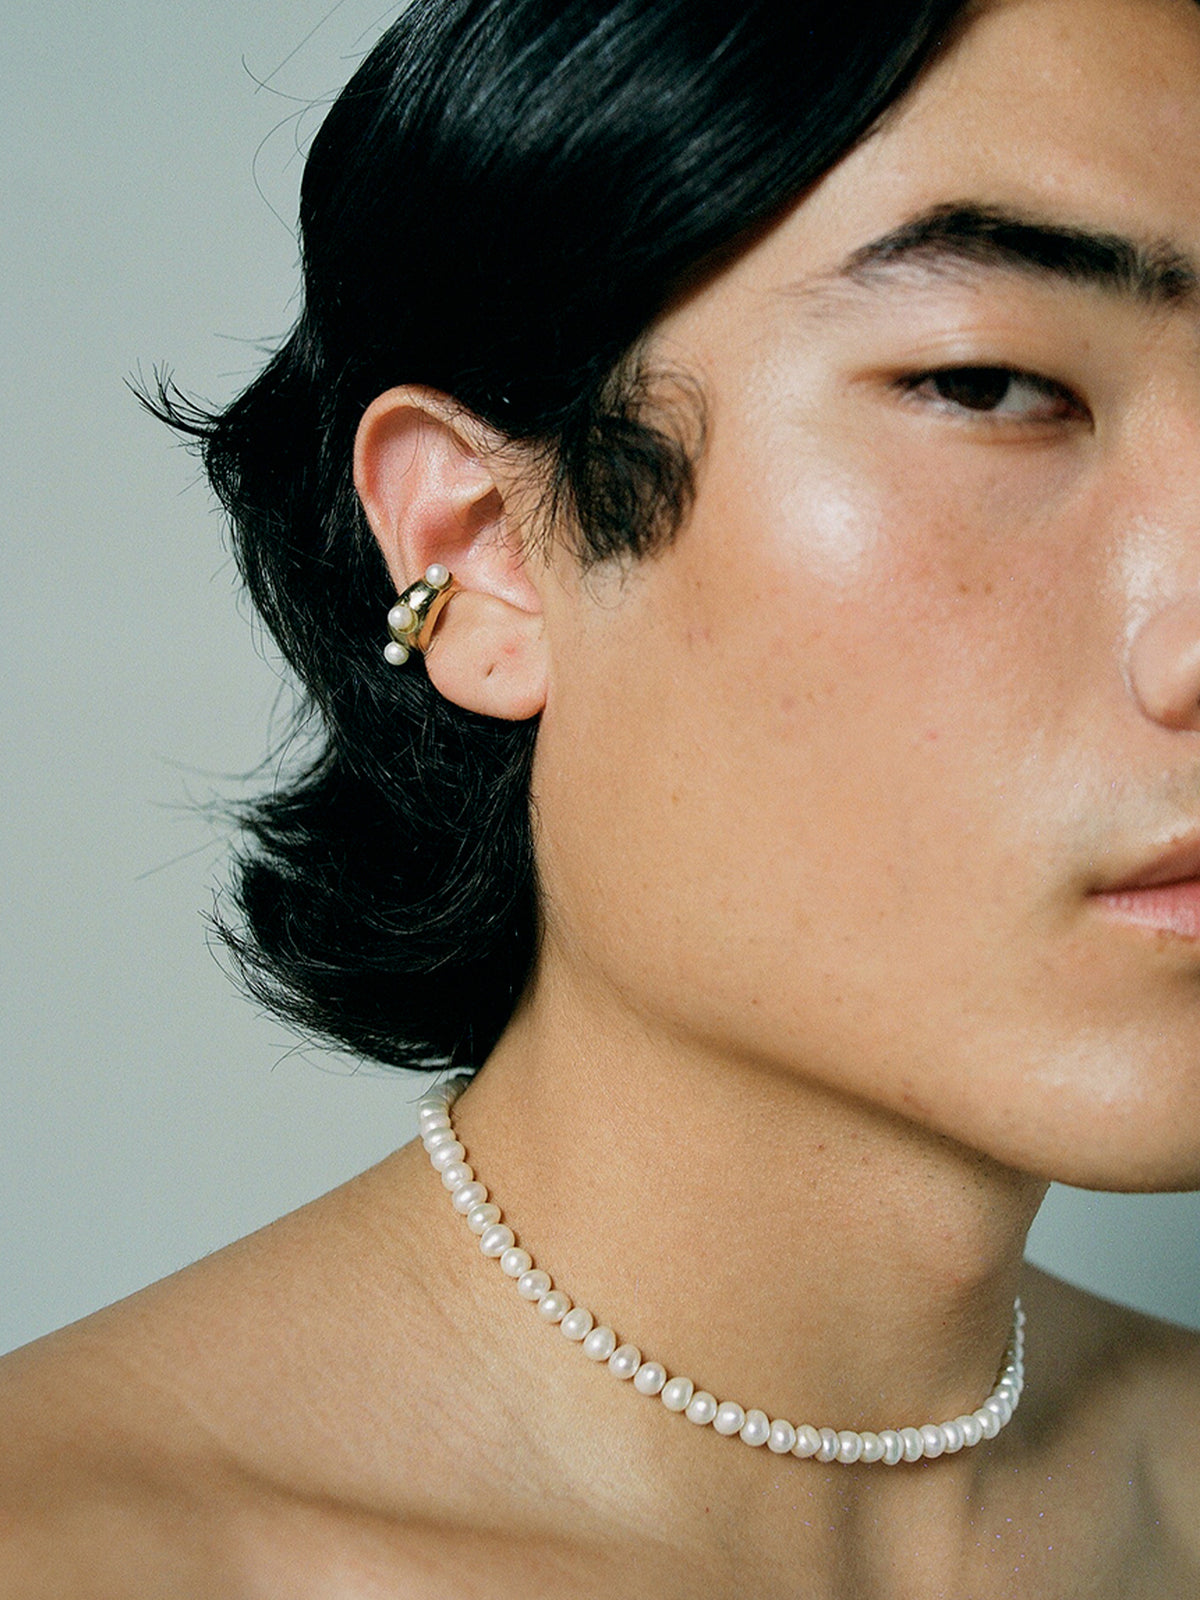 FARIS PATTA Collar in Gold-Plated bronze with white pearls shown on male model. Styled with GROSSO PERLA Ear Cuff in gold-plated bronze.